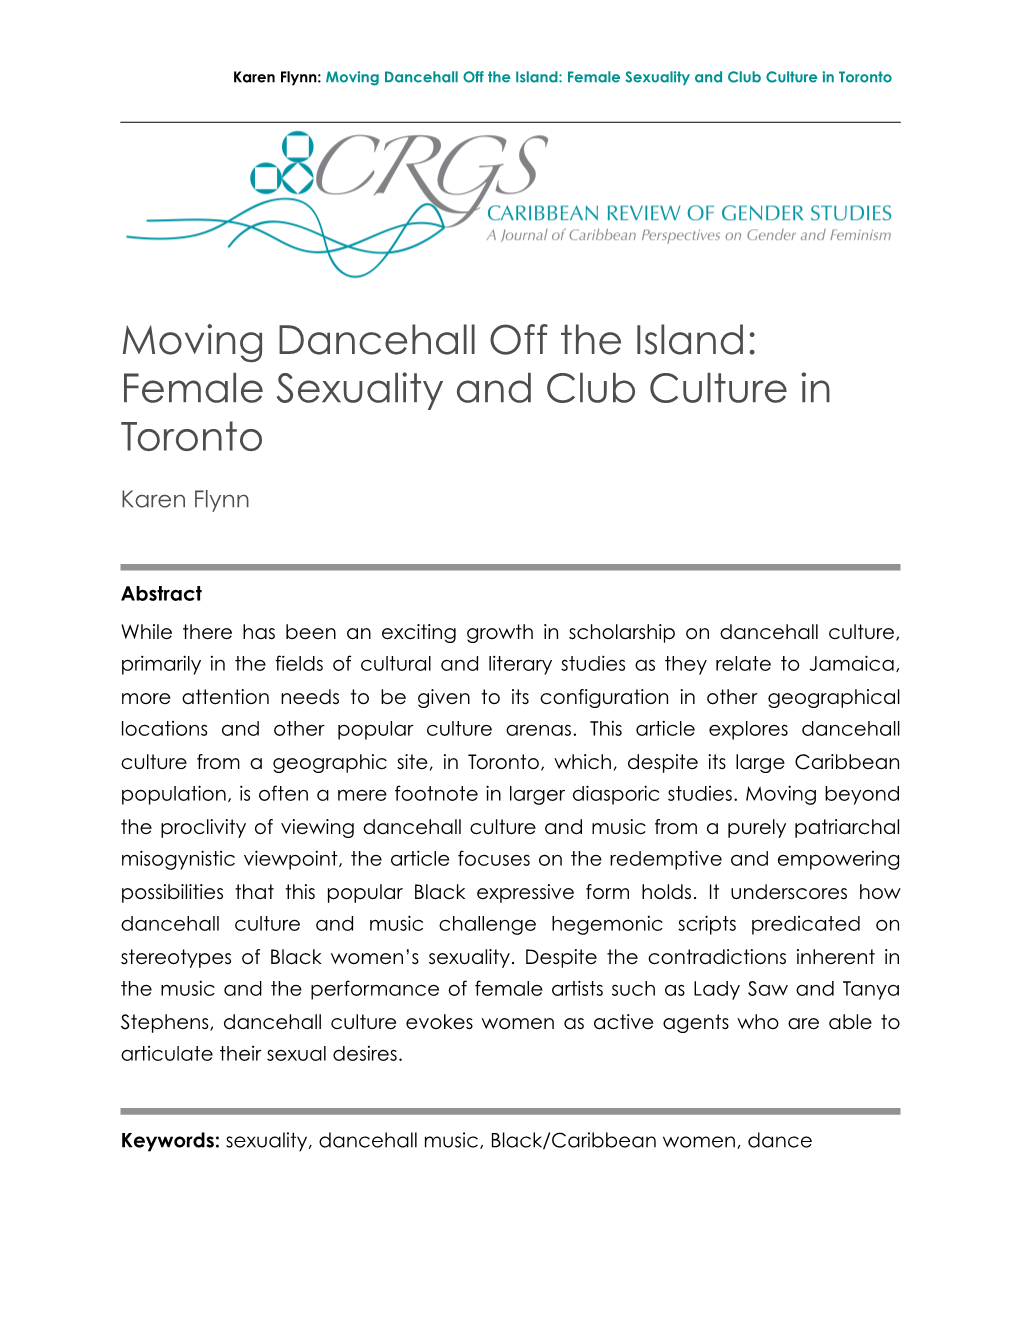 Moving Dancehall Off the Island: Female Sexuality and Club Culture in Toronto